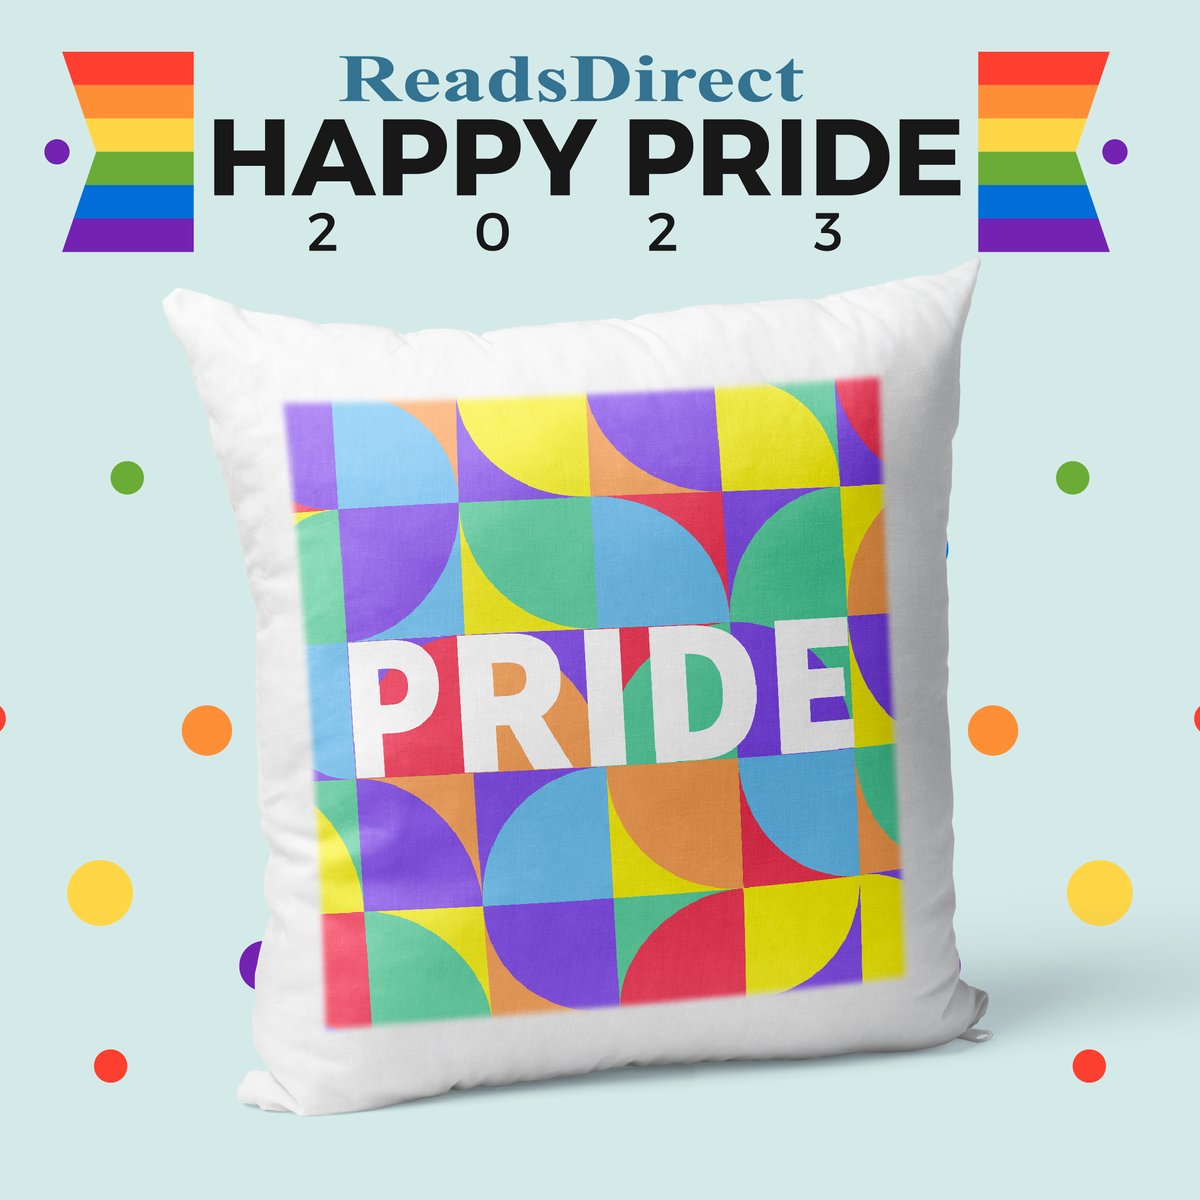 Spread the Love with Personalized Pride Gifts! 🌈❤️ Make this Pride Month extra special with unique gifts that celebrate individuality and diversity. Get yours today

readsdirect.ie/personalised-g…

#pride #pridemonth #personalisedgifts #giftideas